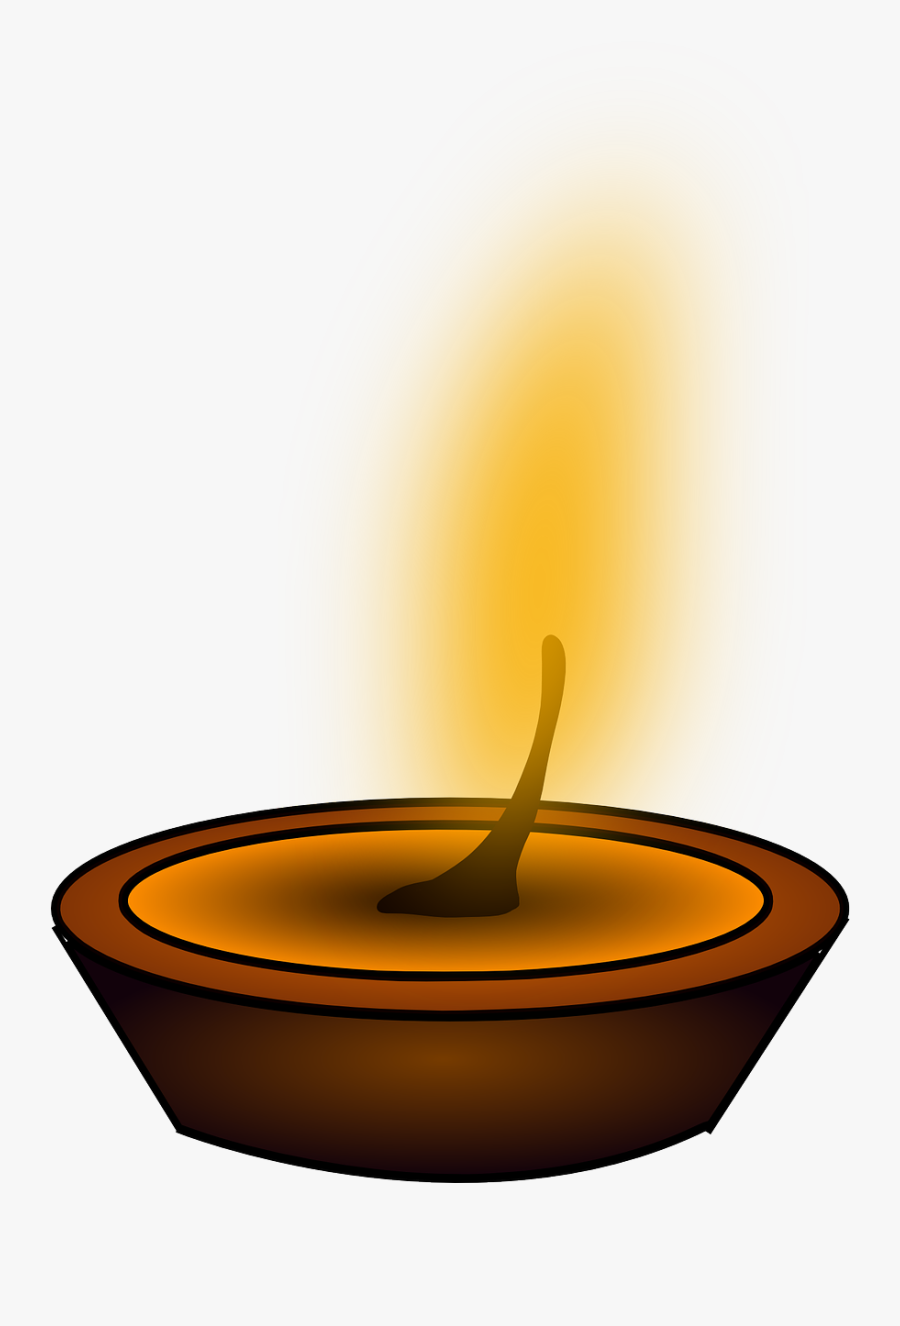 Indian Light Png - Candle Light Vector Png, Transparent Clipart